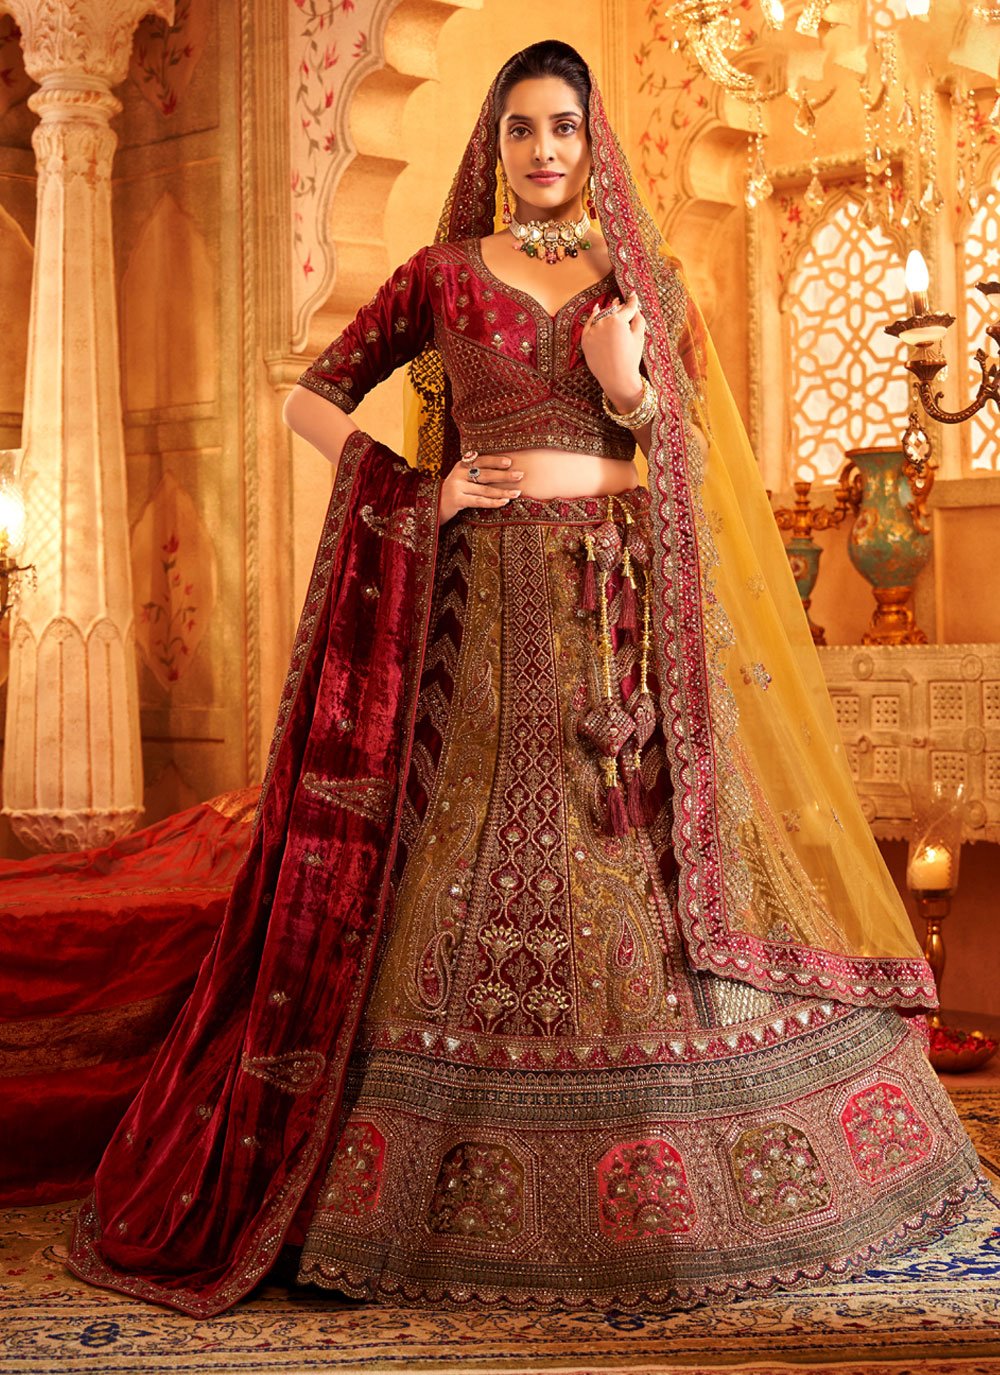 Morpich Velvet Bridal Lehenga Choli With Pink Net Dupatta meticulously  crafted with intricate embroidery and exquisite handwork. The… | Instagram